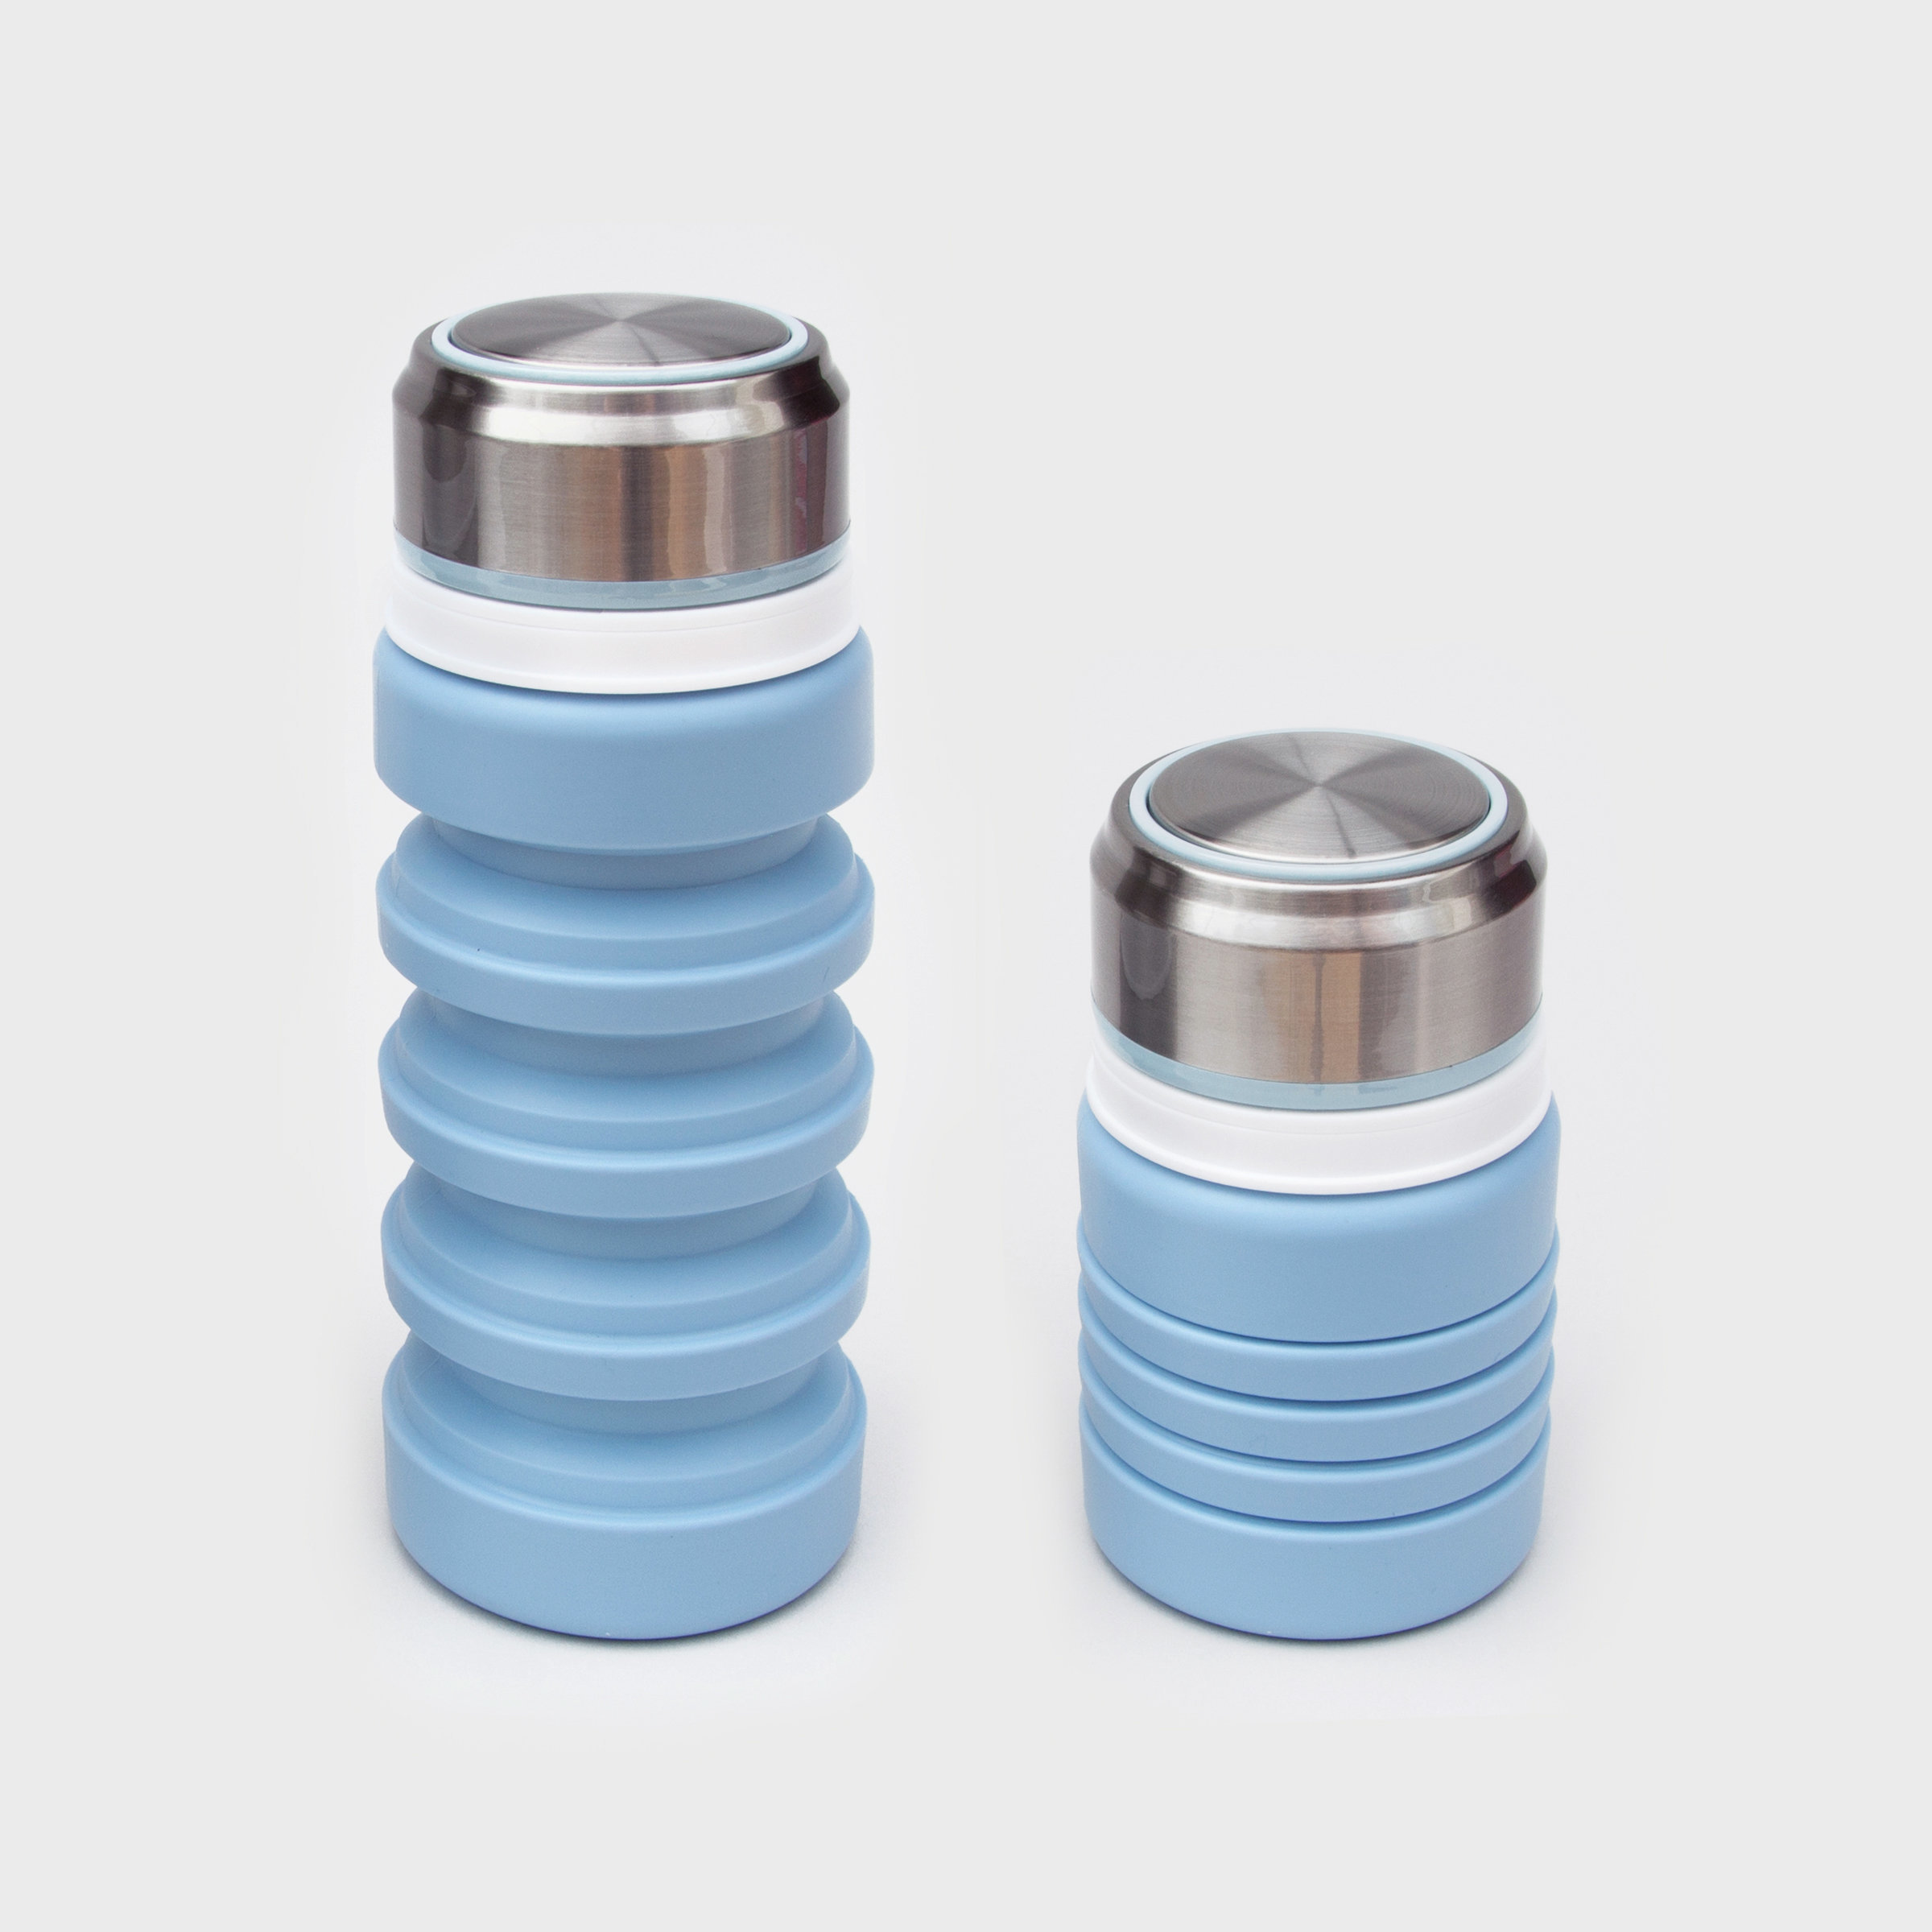 Collapsible rubber water bottle in blue